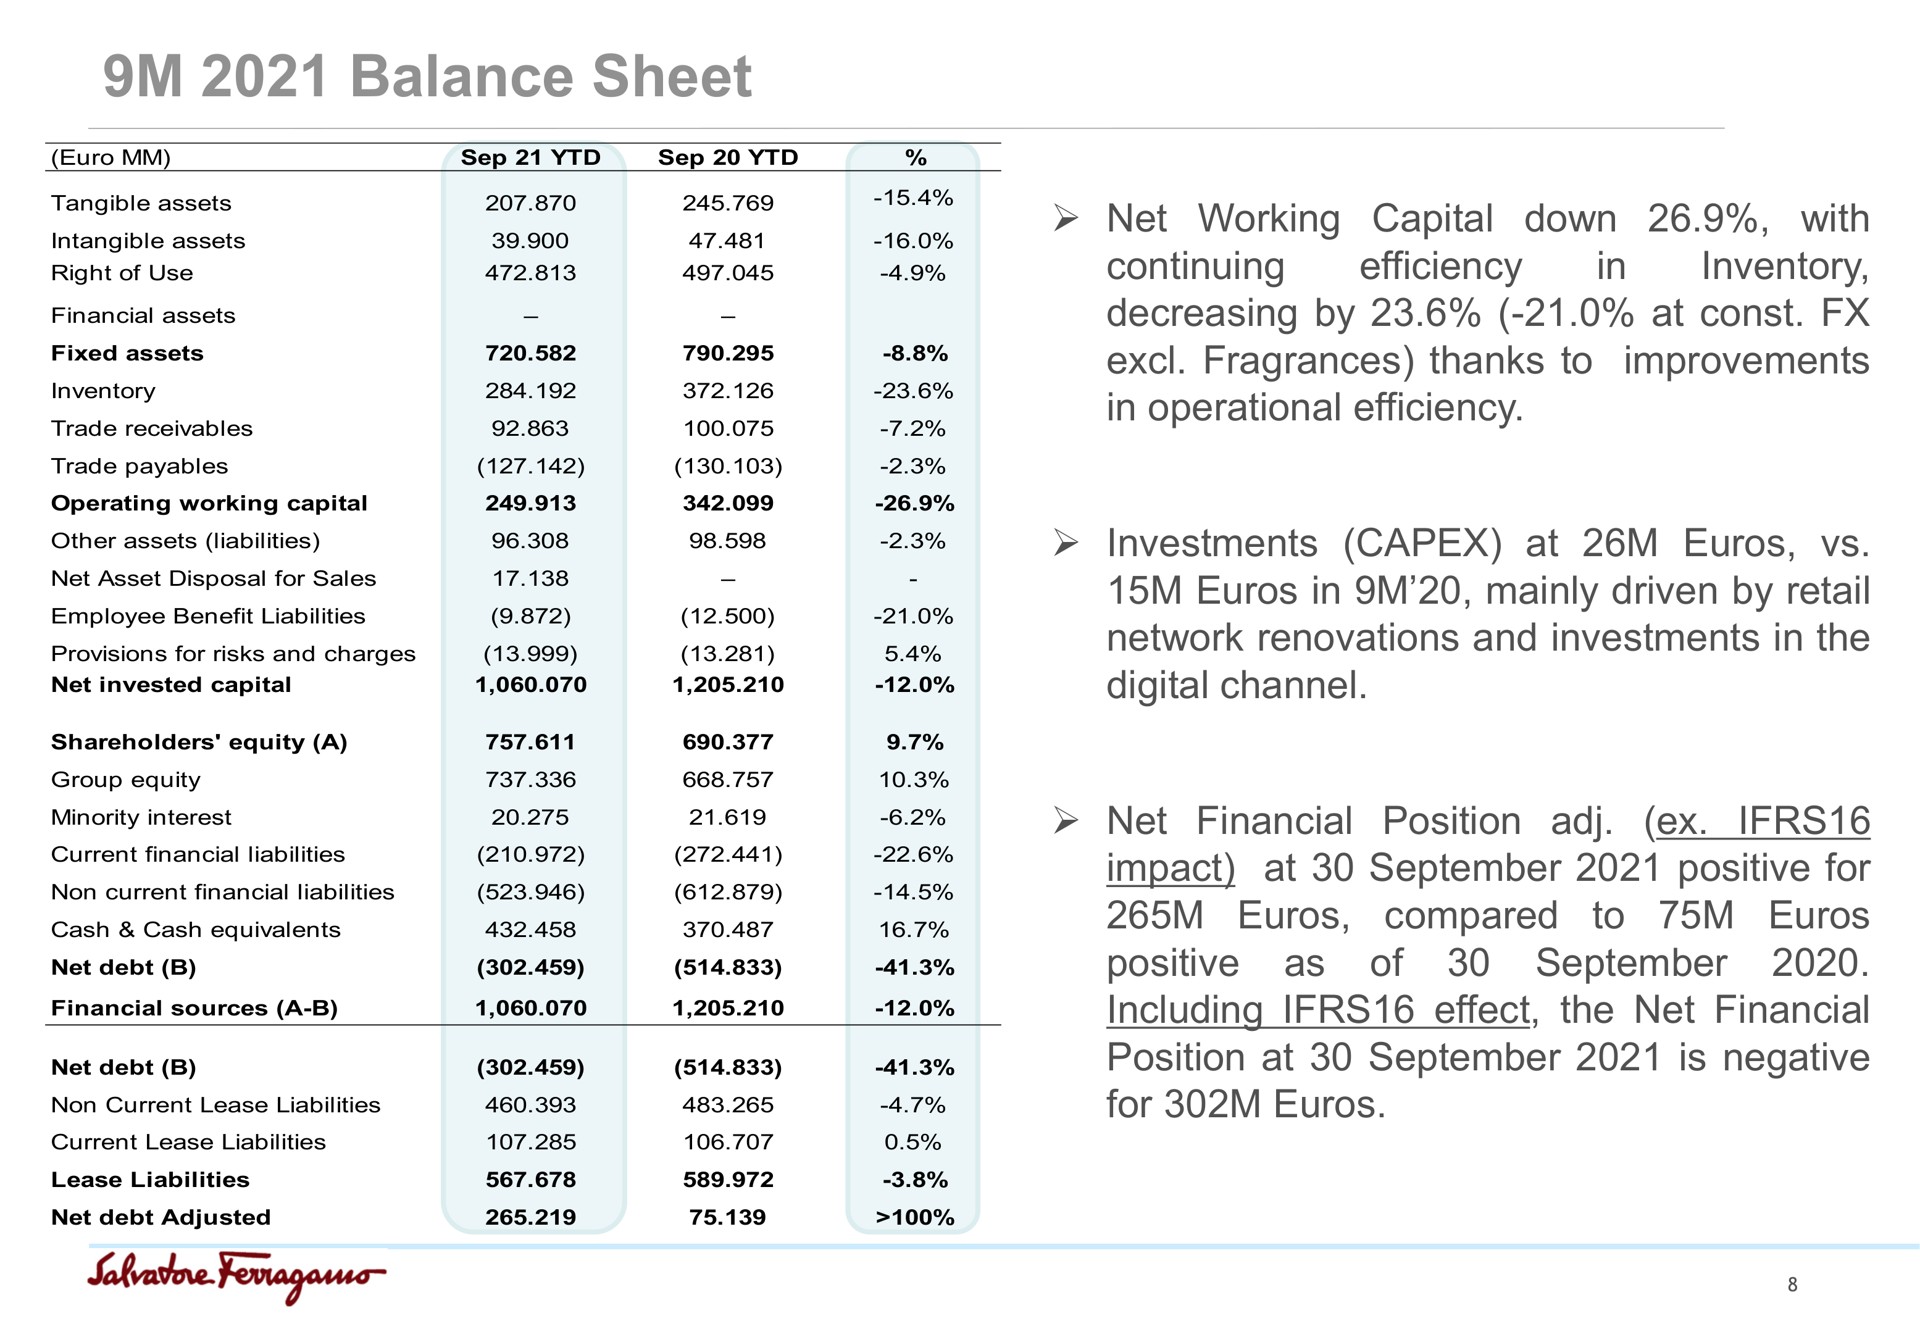 balance sheet net working capital down with continuing inventory efficiency decreasing by at fragrances thanks to improvements in operational efficiency in investments at in mainly driven by retail network renovations and investments in the digital channel net financial position impact at positive for compared to positive including effect the net financial position at is negative for as of | Salvatore Ferragamo